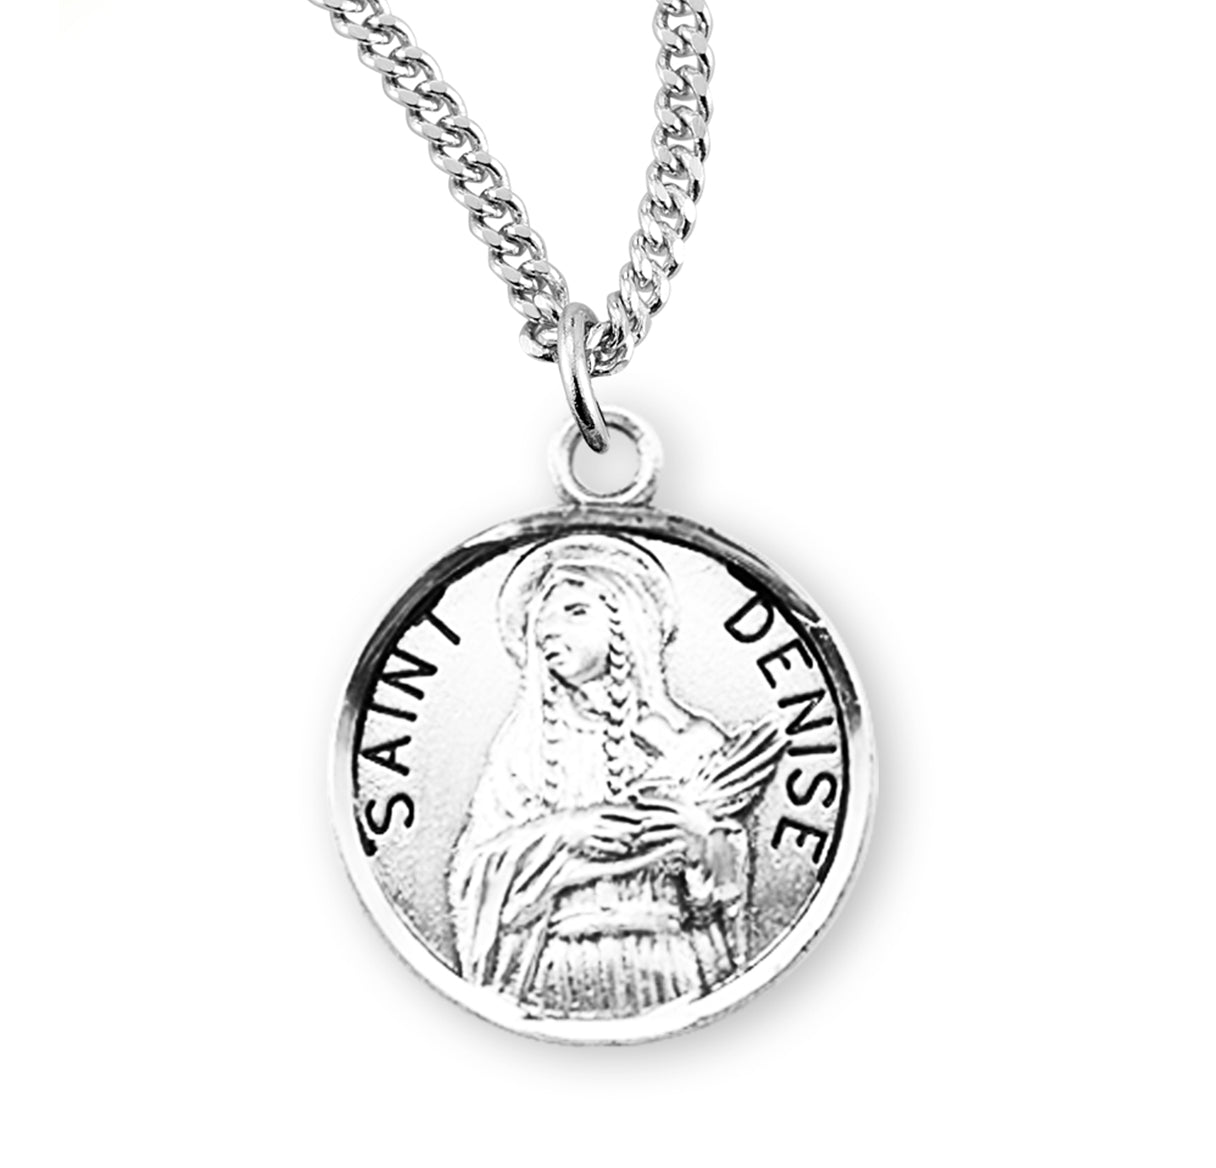 Patron Saint Denise Round Sterling Silver Medal